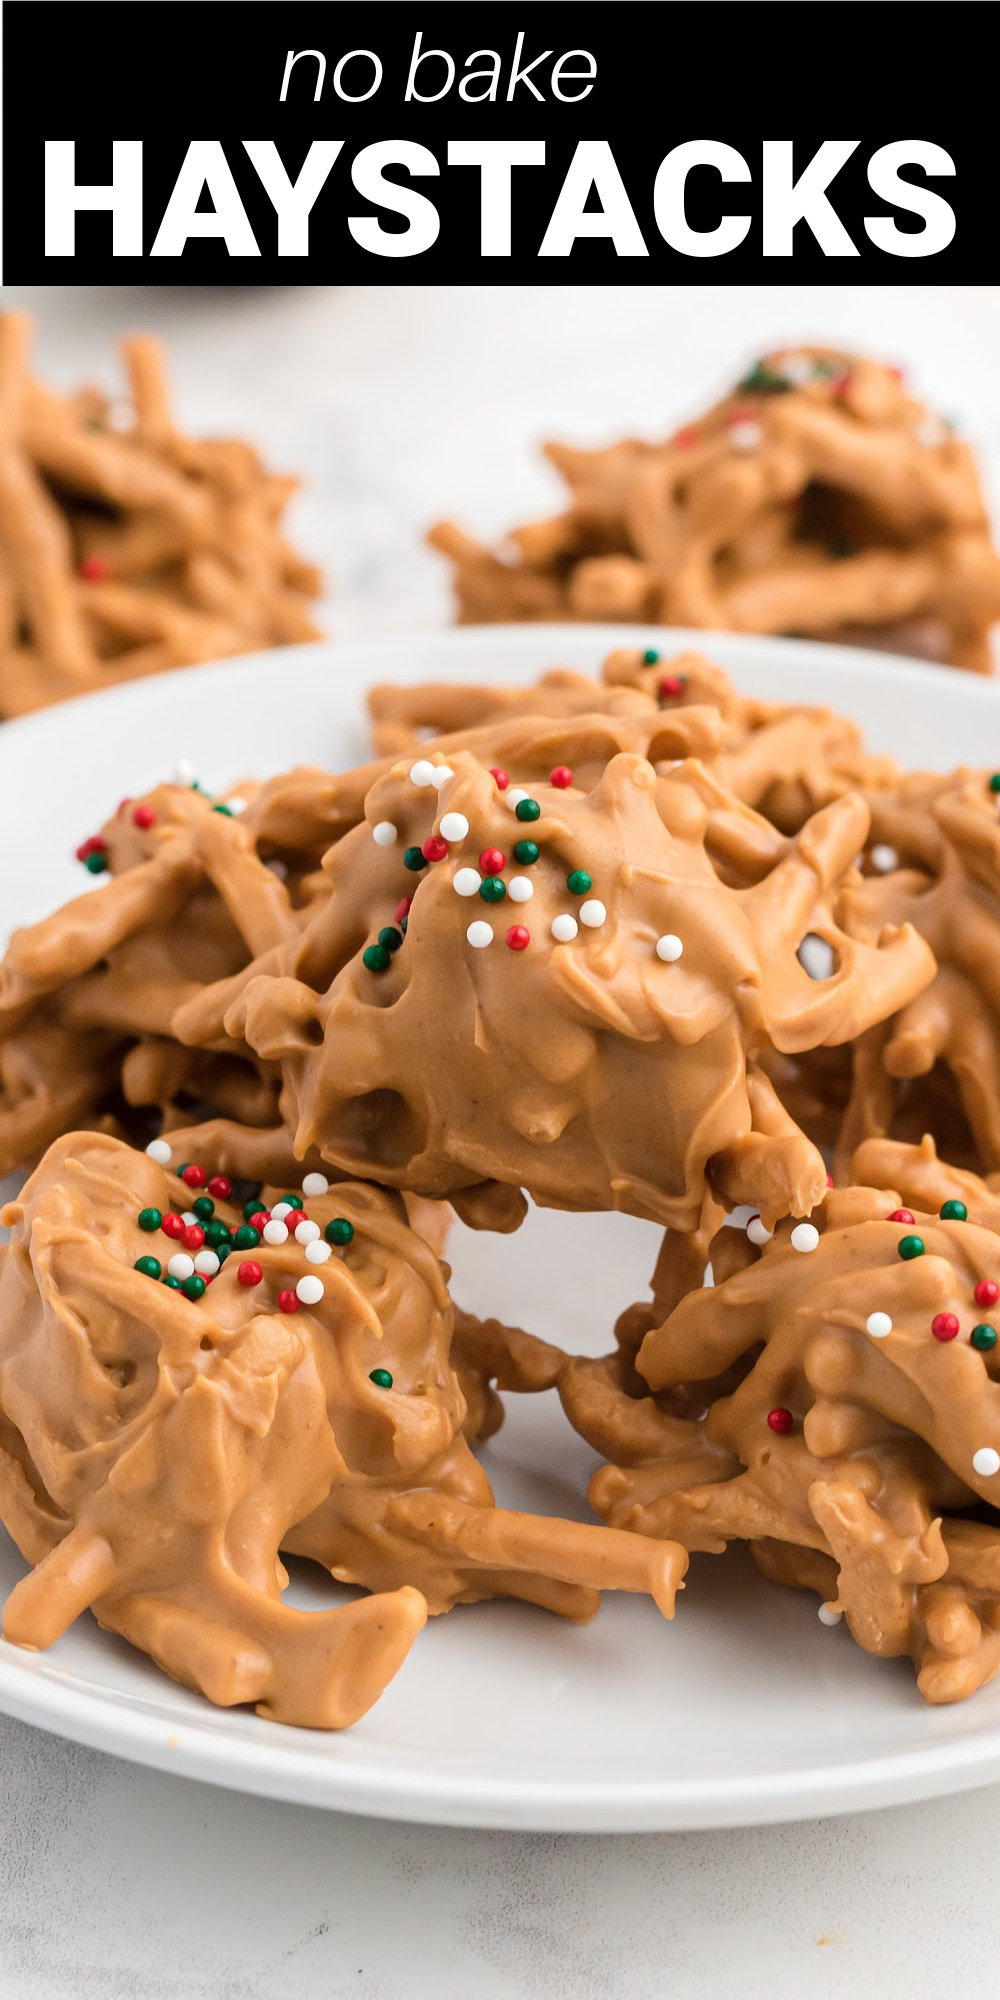 Need a last-minute sweet and easy treat this holiday season? This No Bake Haystack recipe creates delectable little treats by combing crunchy chow mein noodles, butterscotch chips and creamy peanut butter that can be ready in minutes.